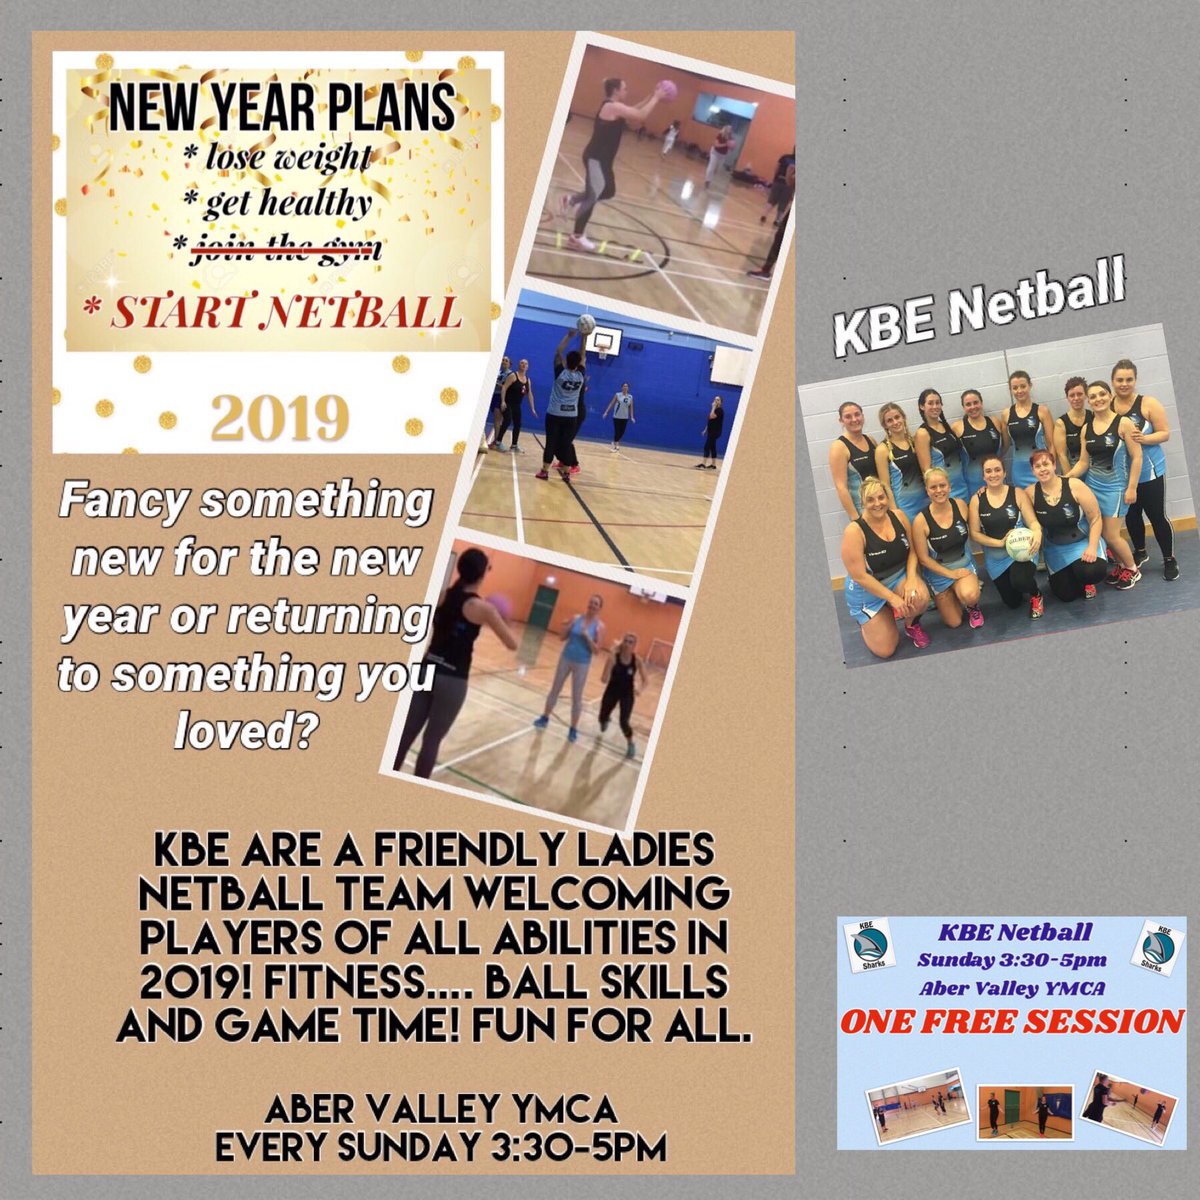 Join KBE NETBALL in 2019!! A fun, social, back to netball team in South Wales for ALL abilities from beginners to beyond!! 🏀 start the new year the right way!!! #netball #fitness #netballfamily #newteam #joinus #tryitnow #southwales #southwalesnetball #welshnetball #dreamteam